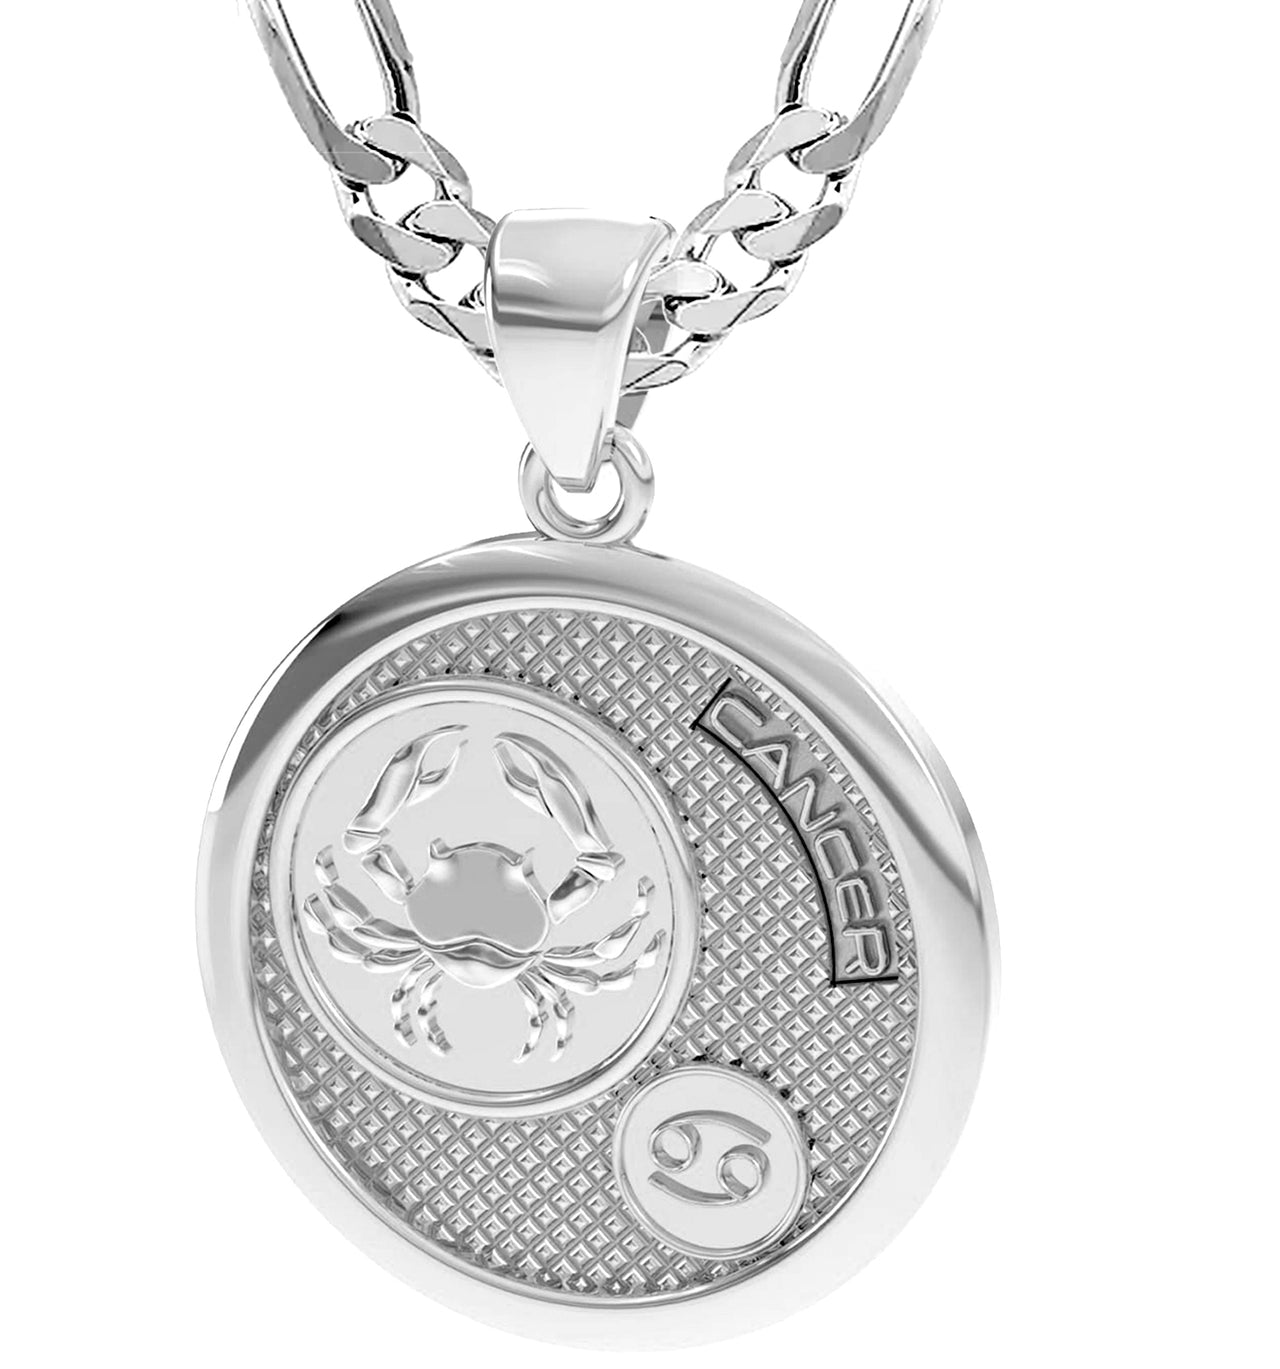 Men's 925 Sterling Silver Round Cancer Zodiac Polished Finish Pendant Necklace, 33mm